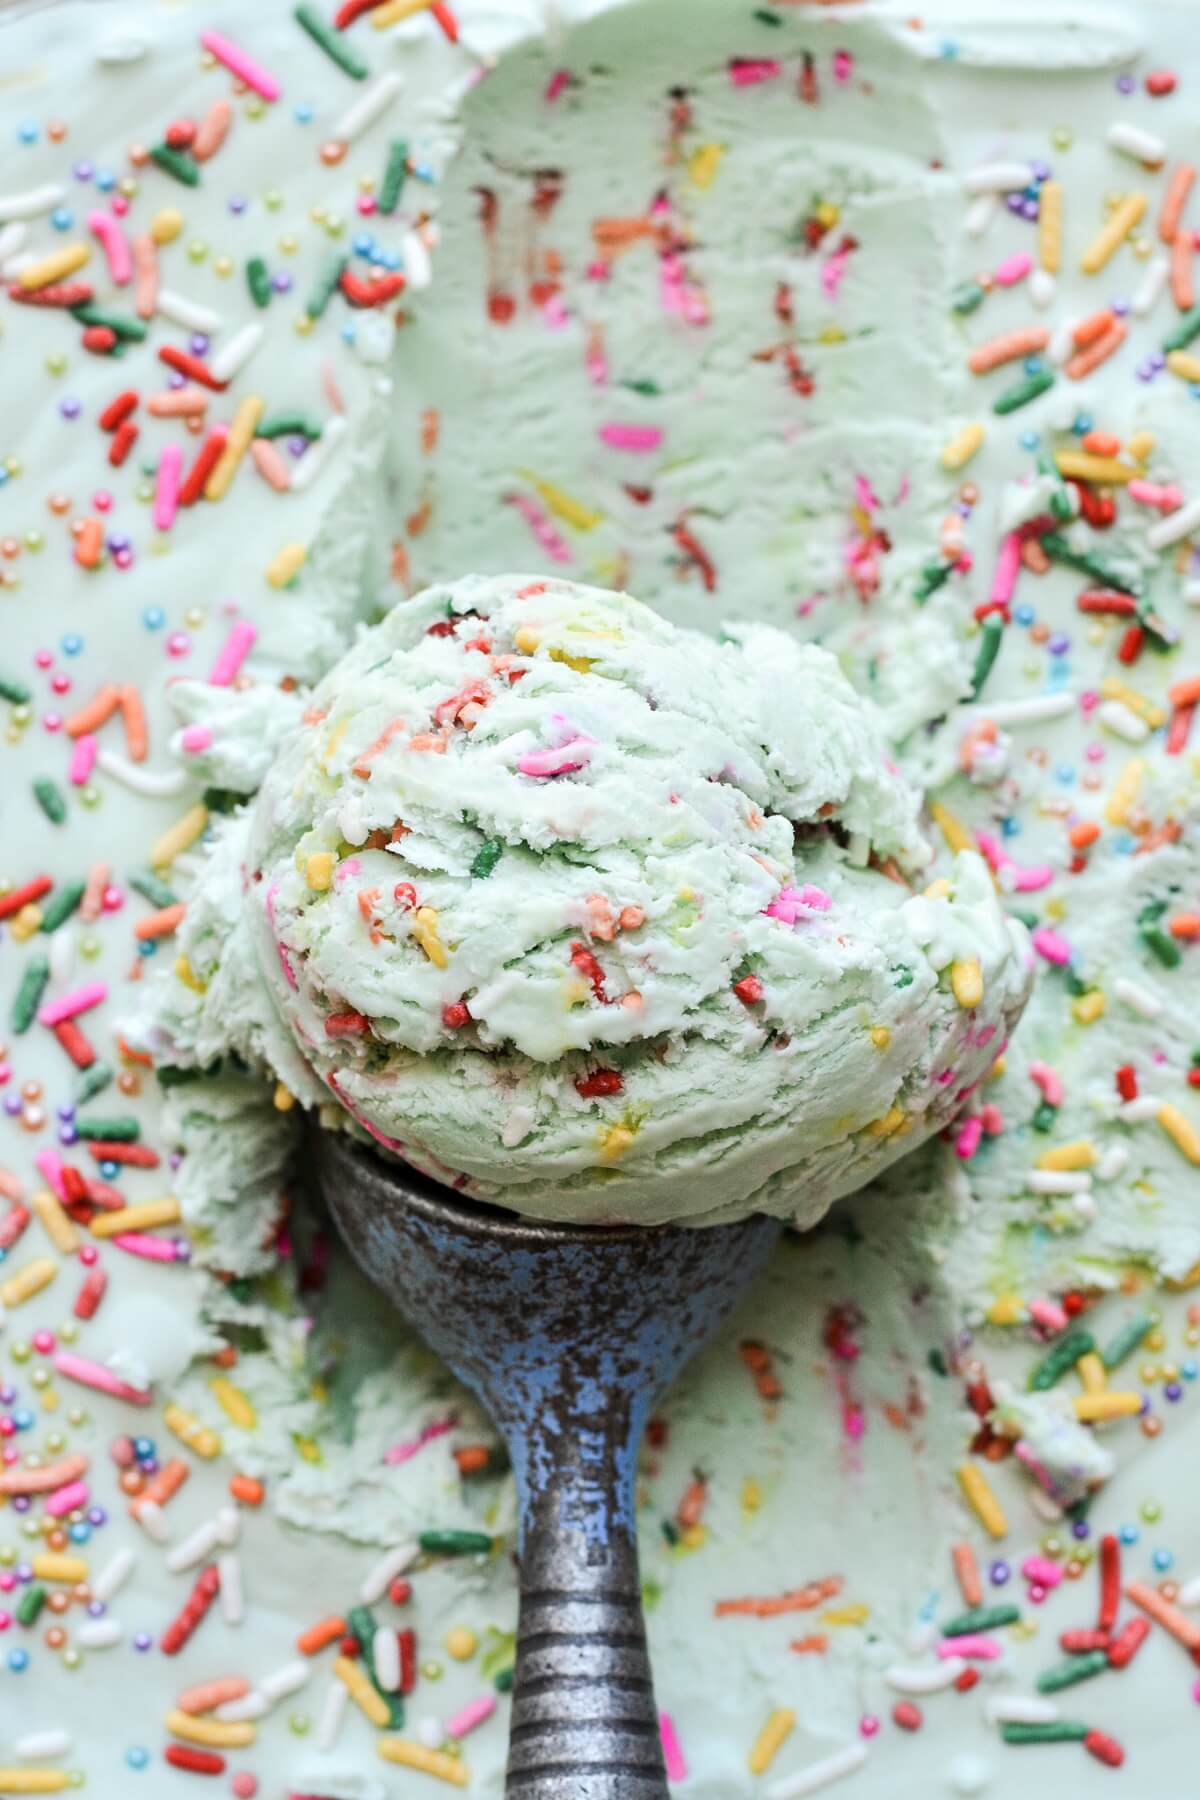 A scoop of sprinkle ice cream.